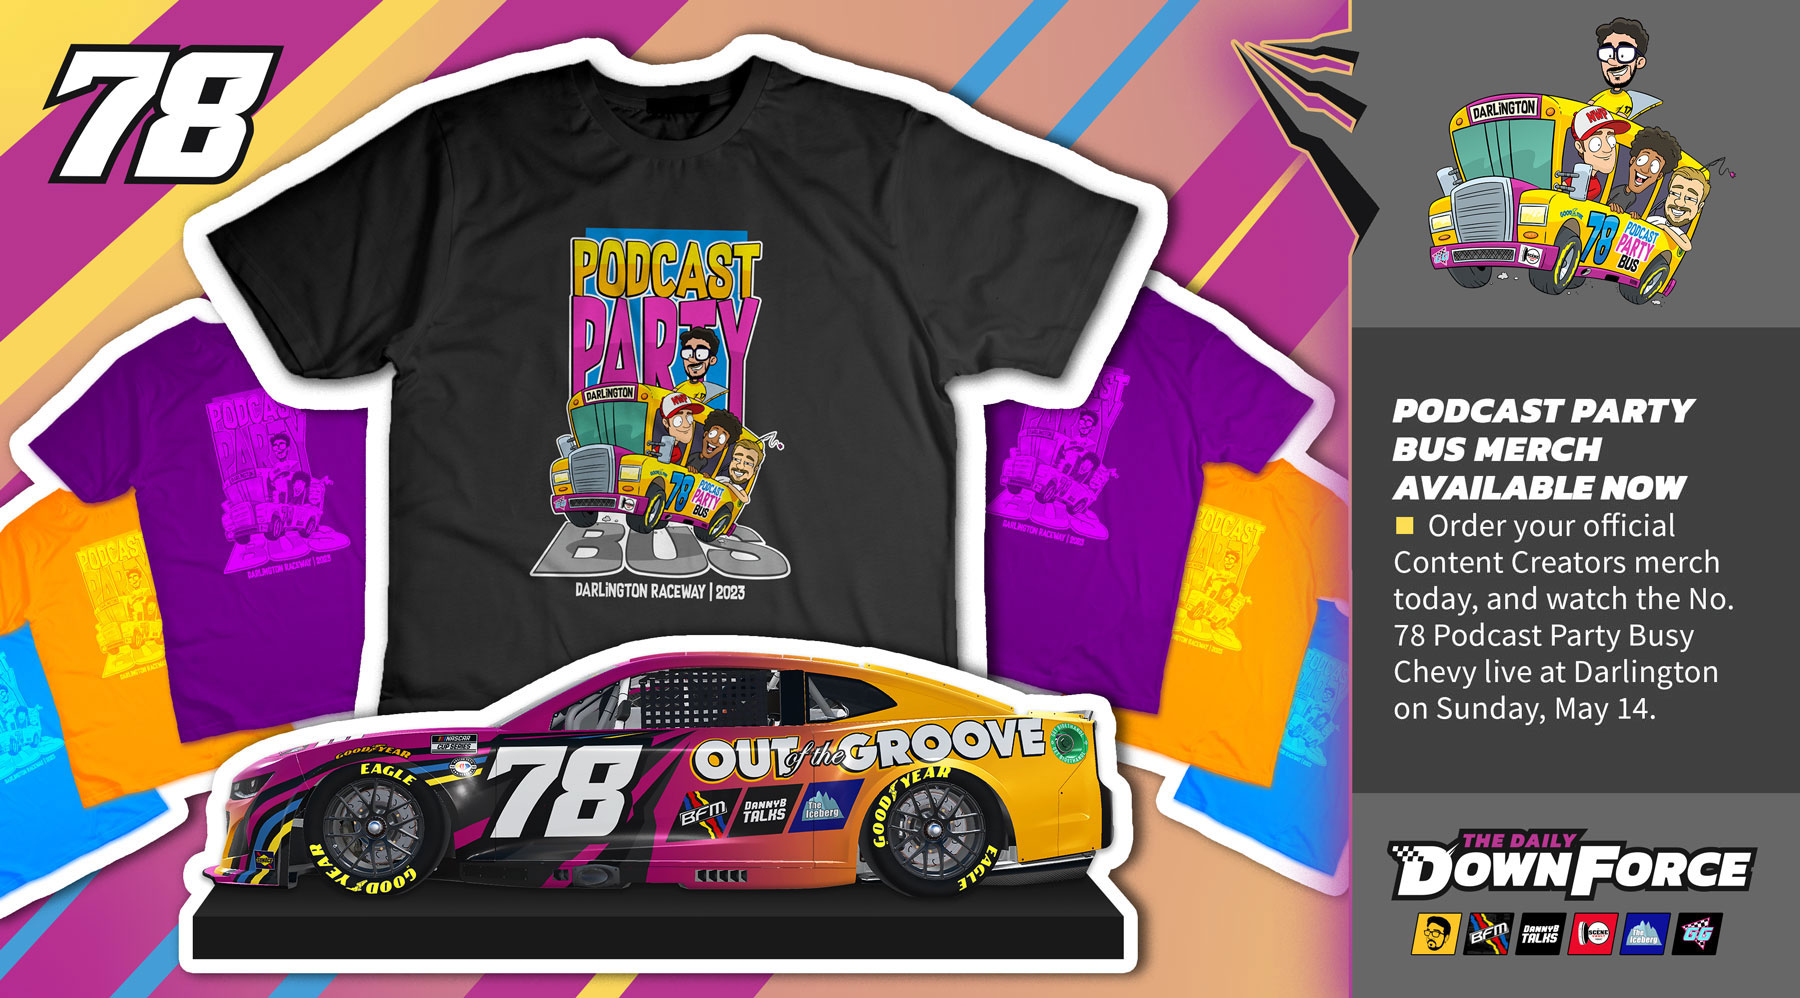 The Daily Downforce Podcast Party Bus 2023 Merch